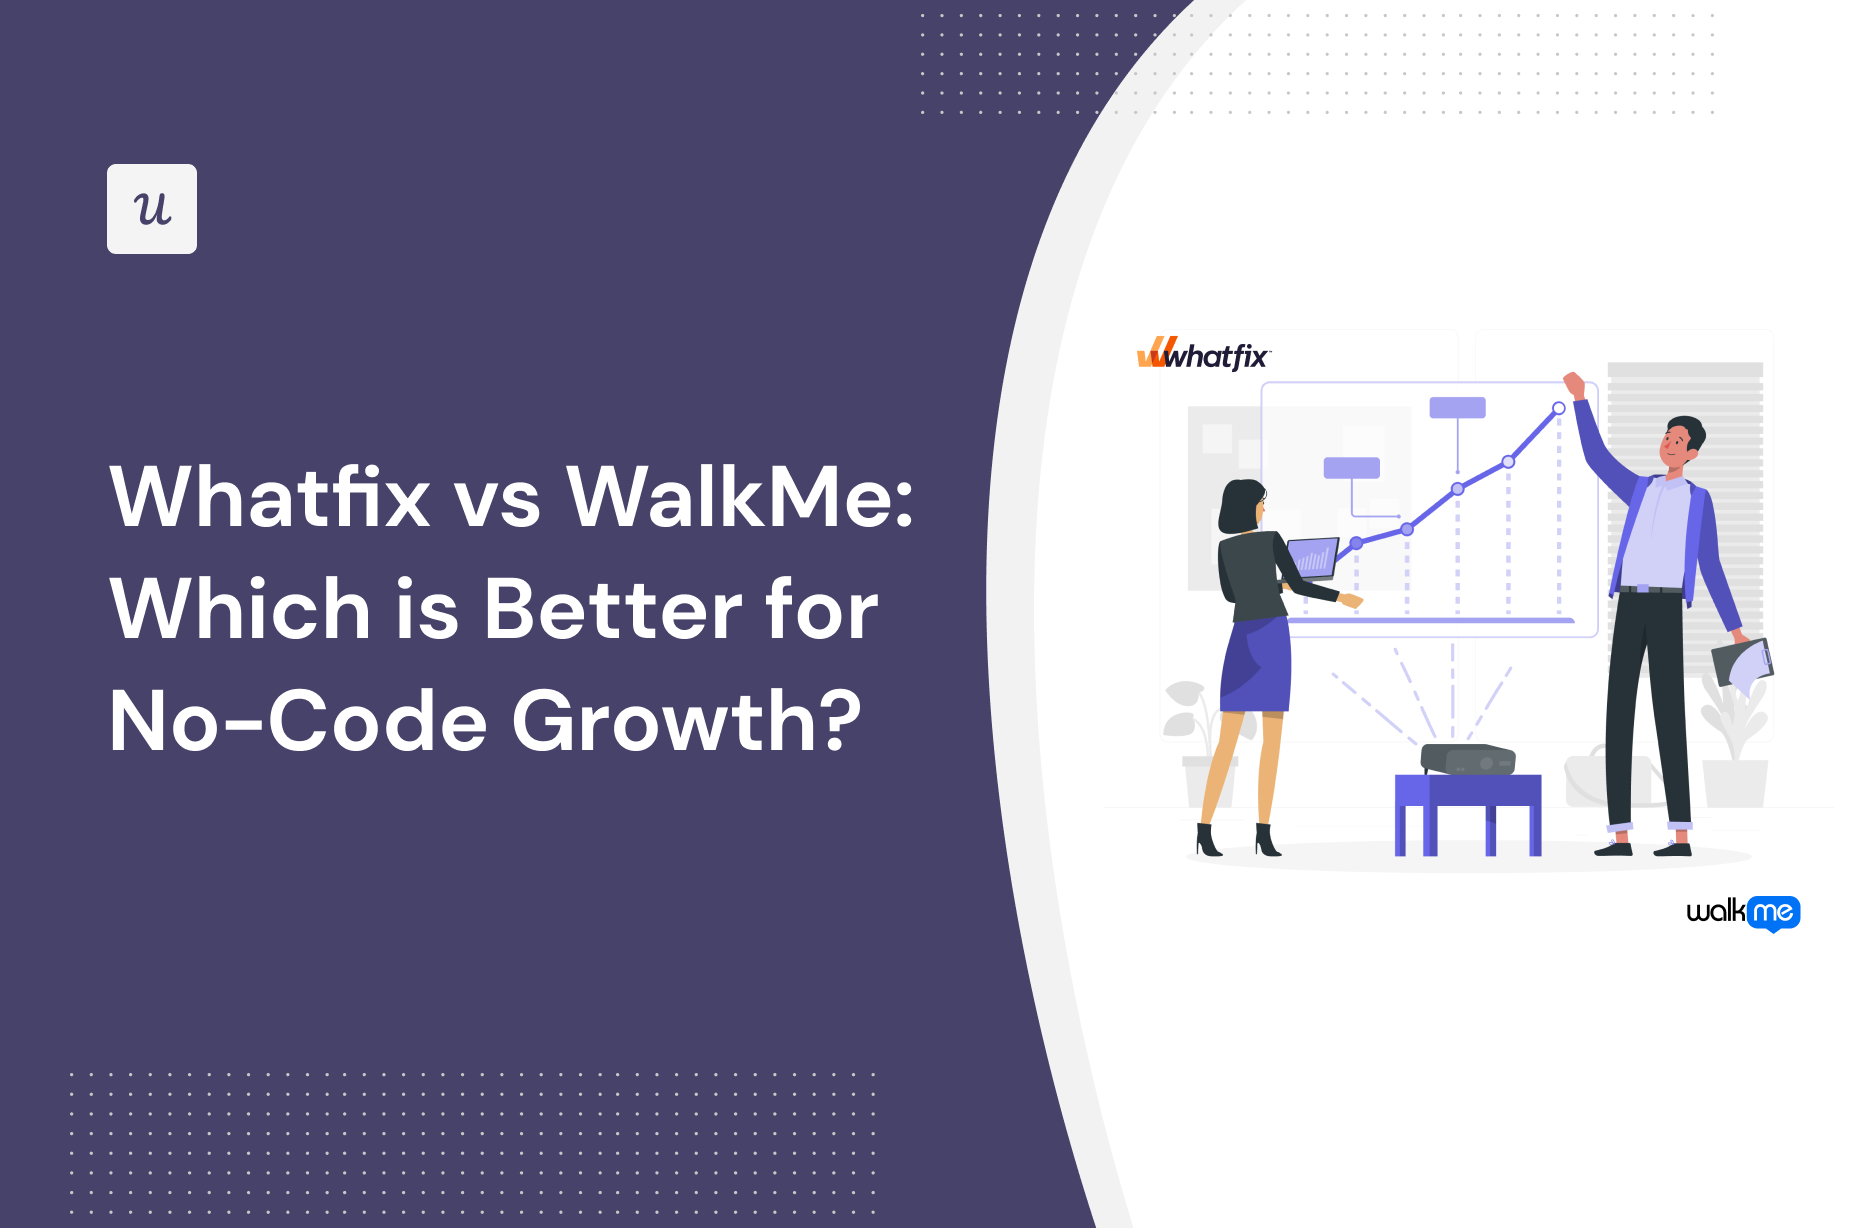 Whatfix vs WalkMe: Which is Better for No-Code Growth?